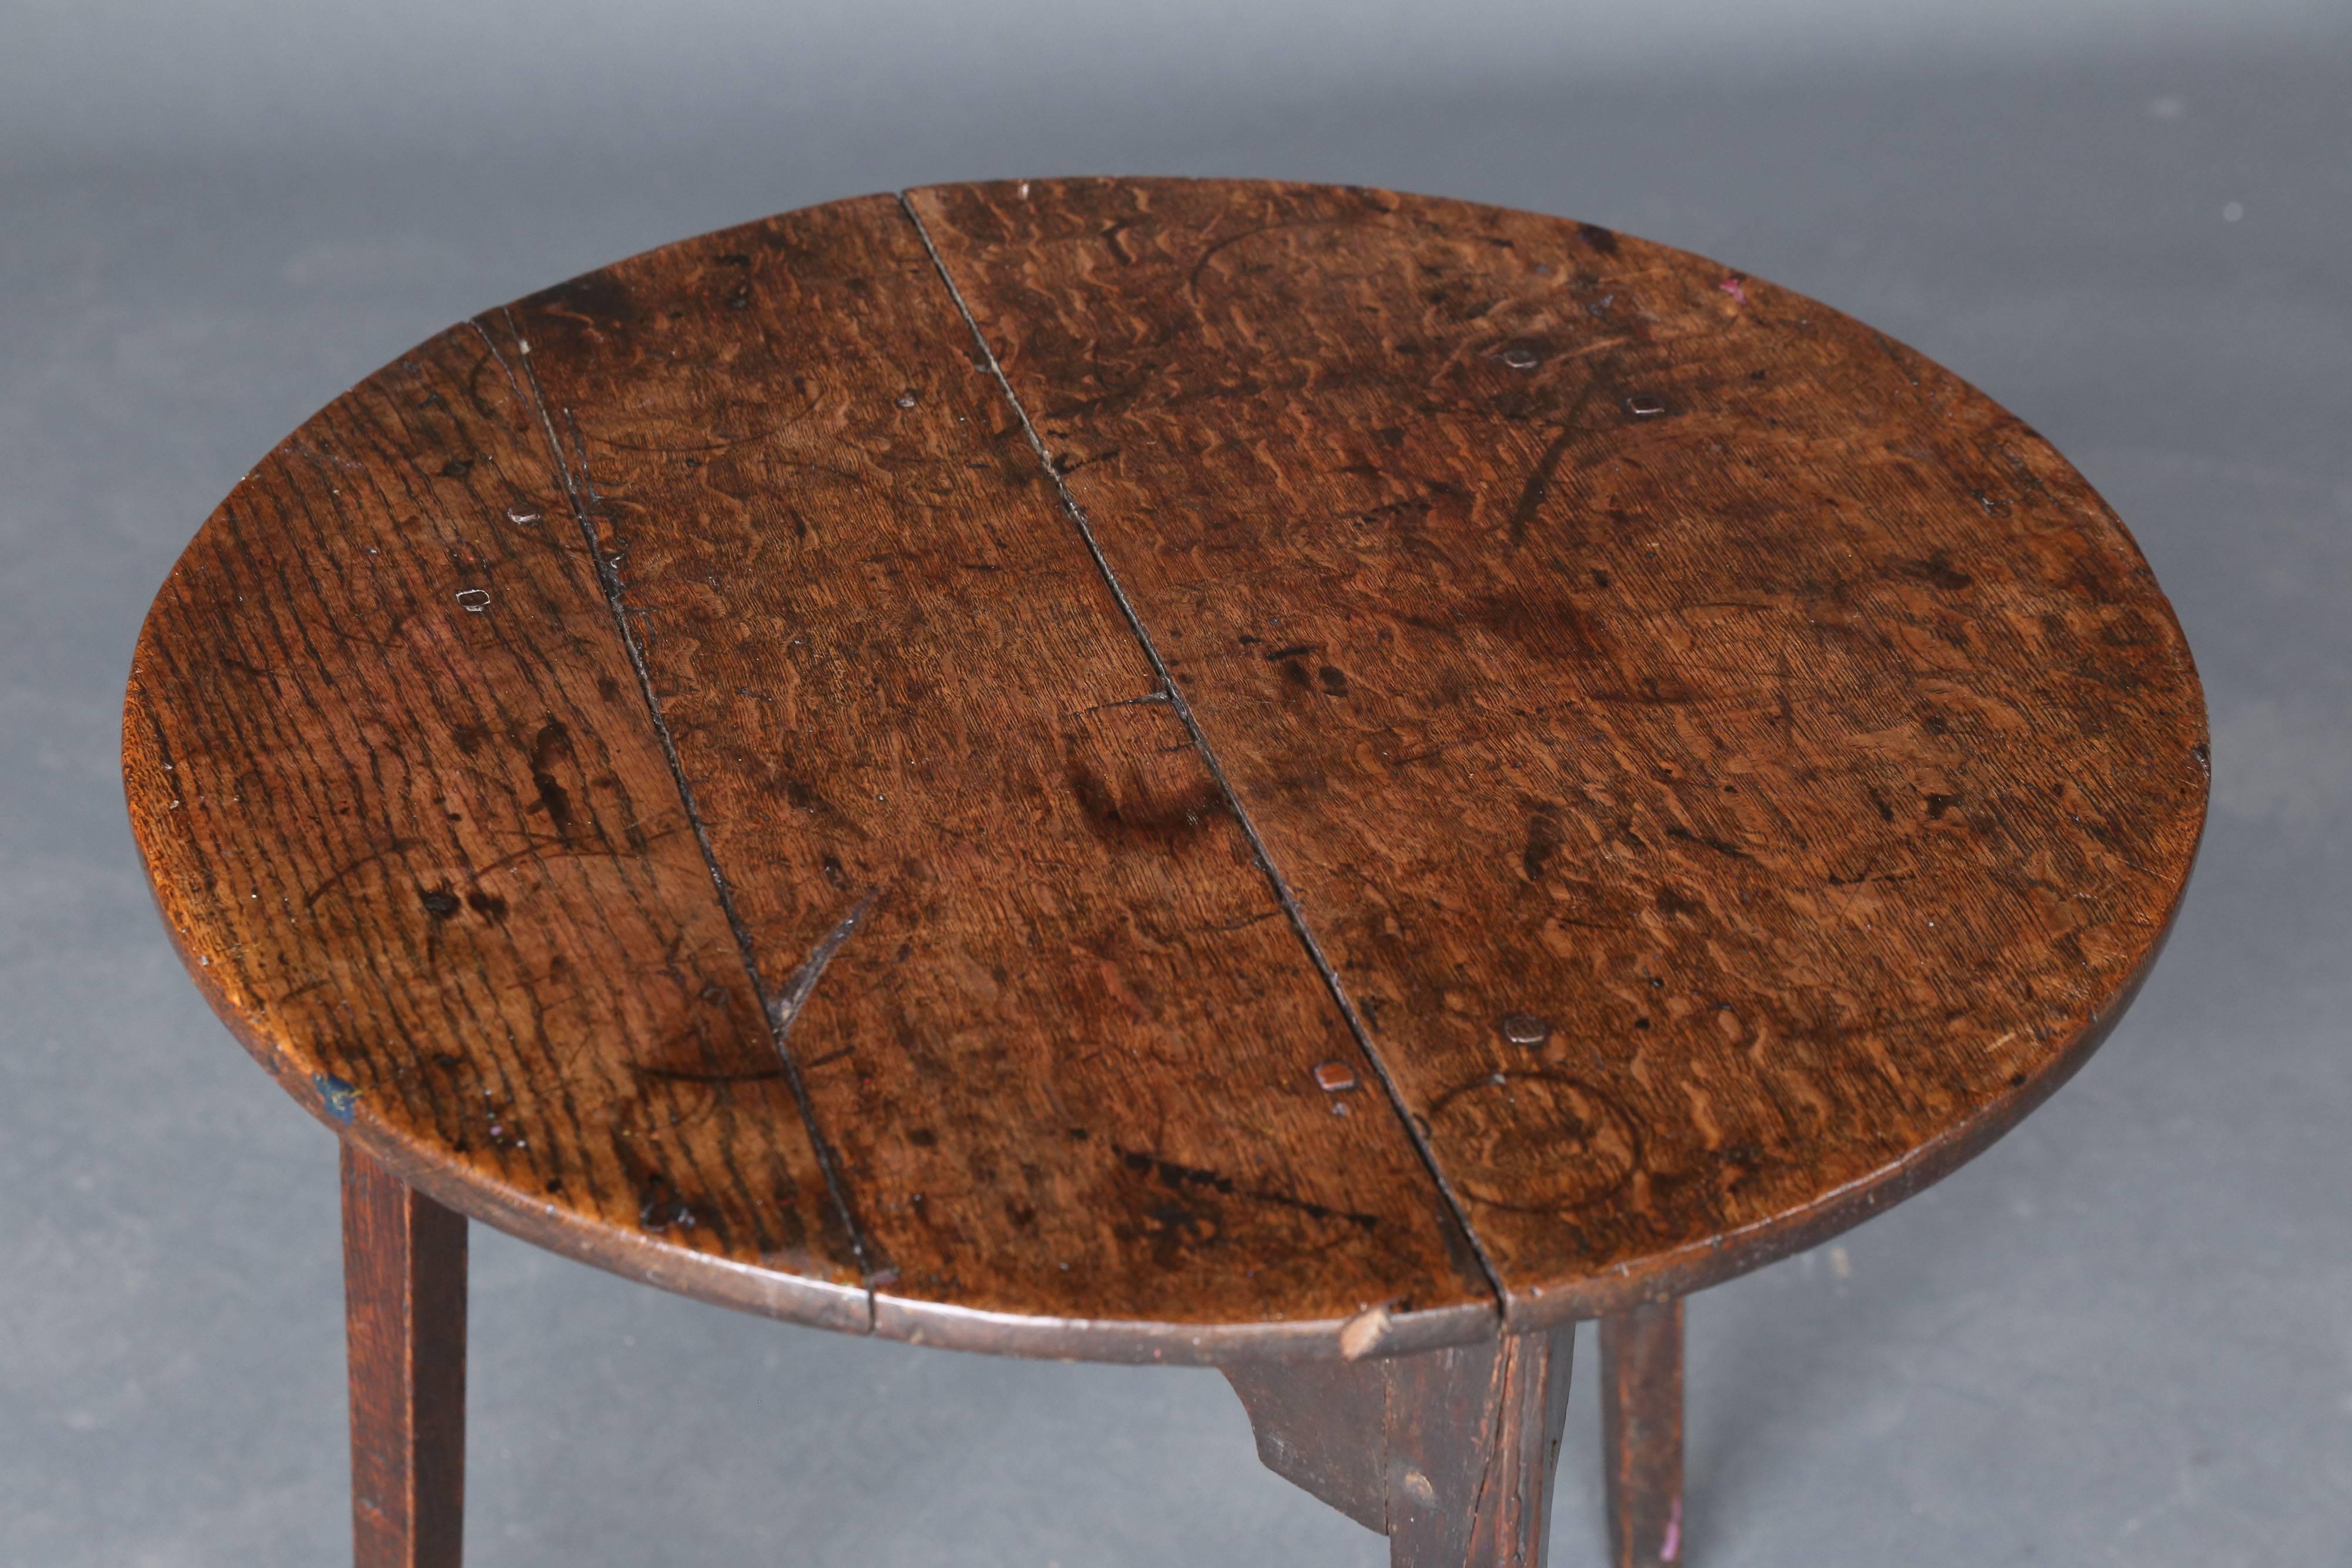 19th century oak table with wooden dowels on the top and legs. Bracketed skirt between the legs. Beautiful patina!